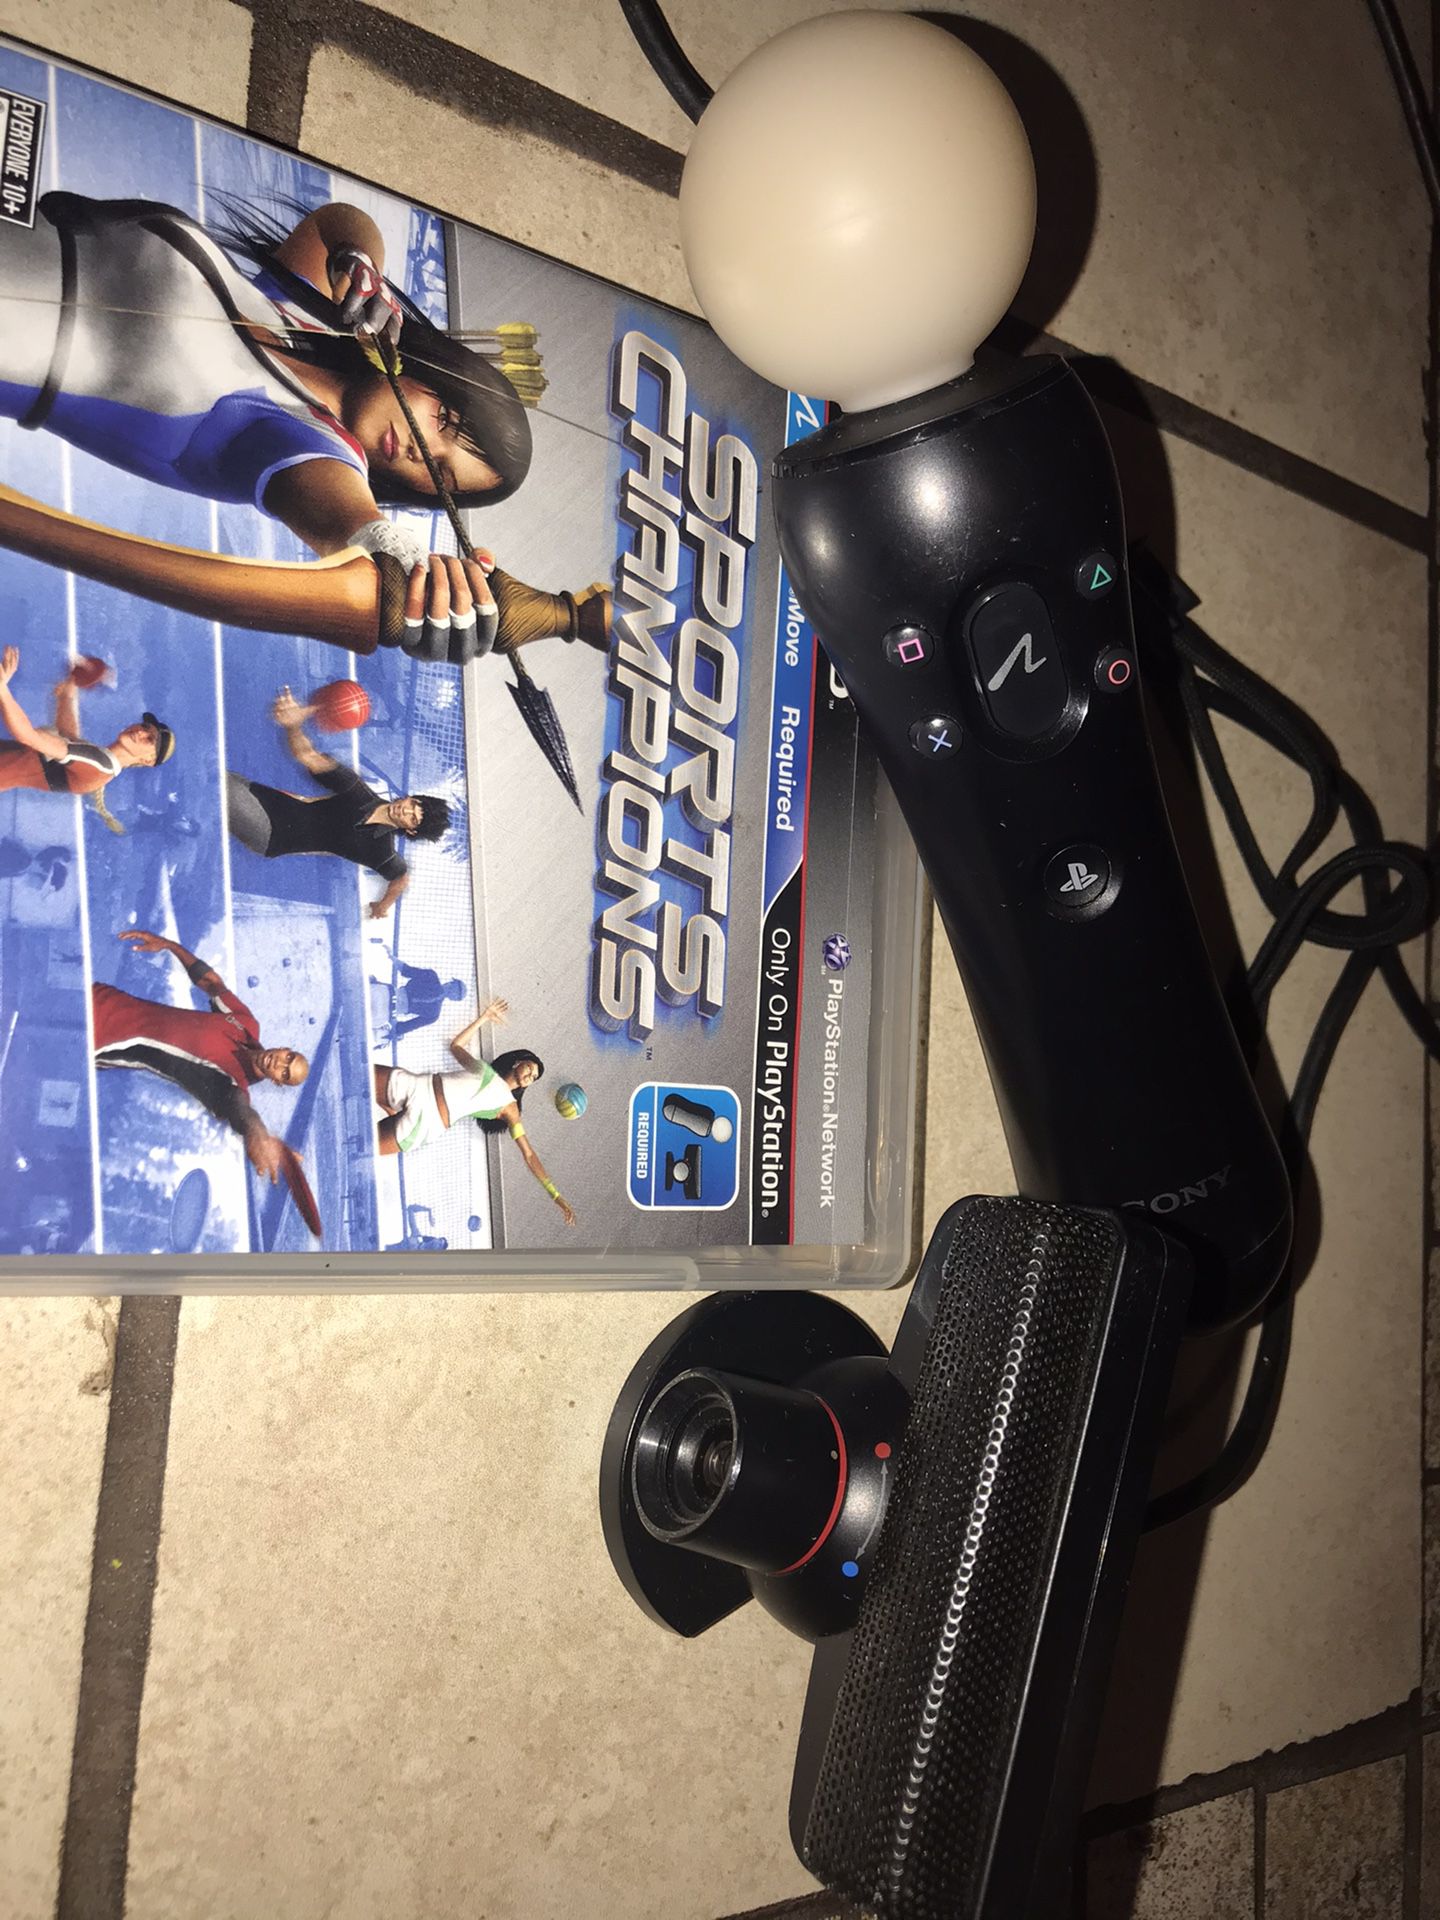 PS3 Motion equipment and game